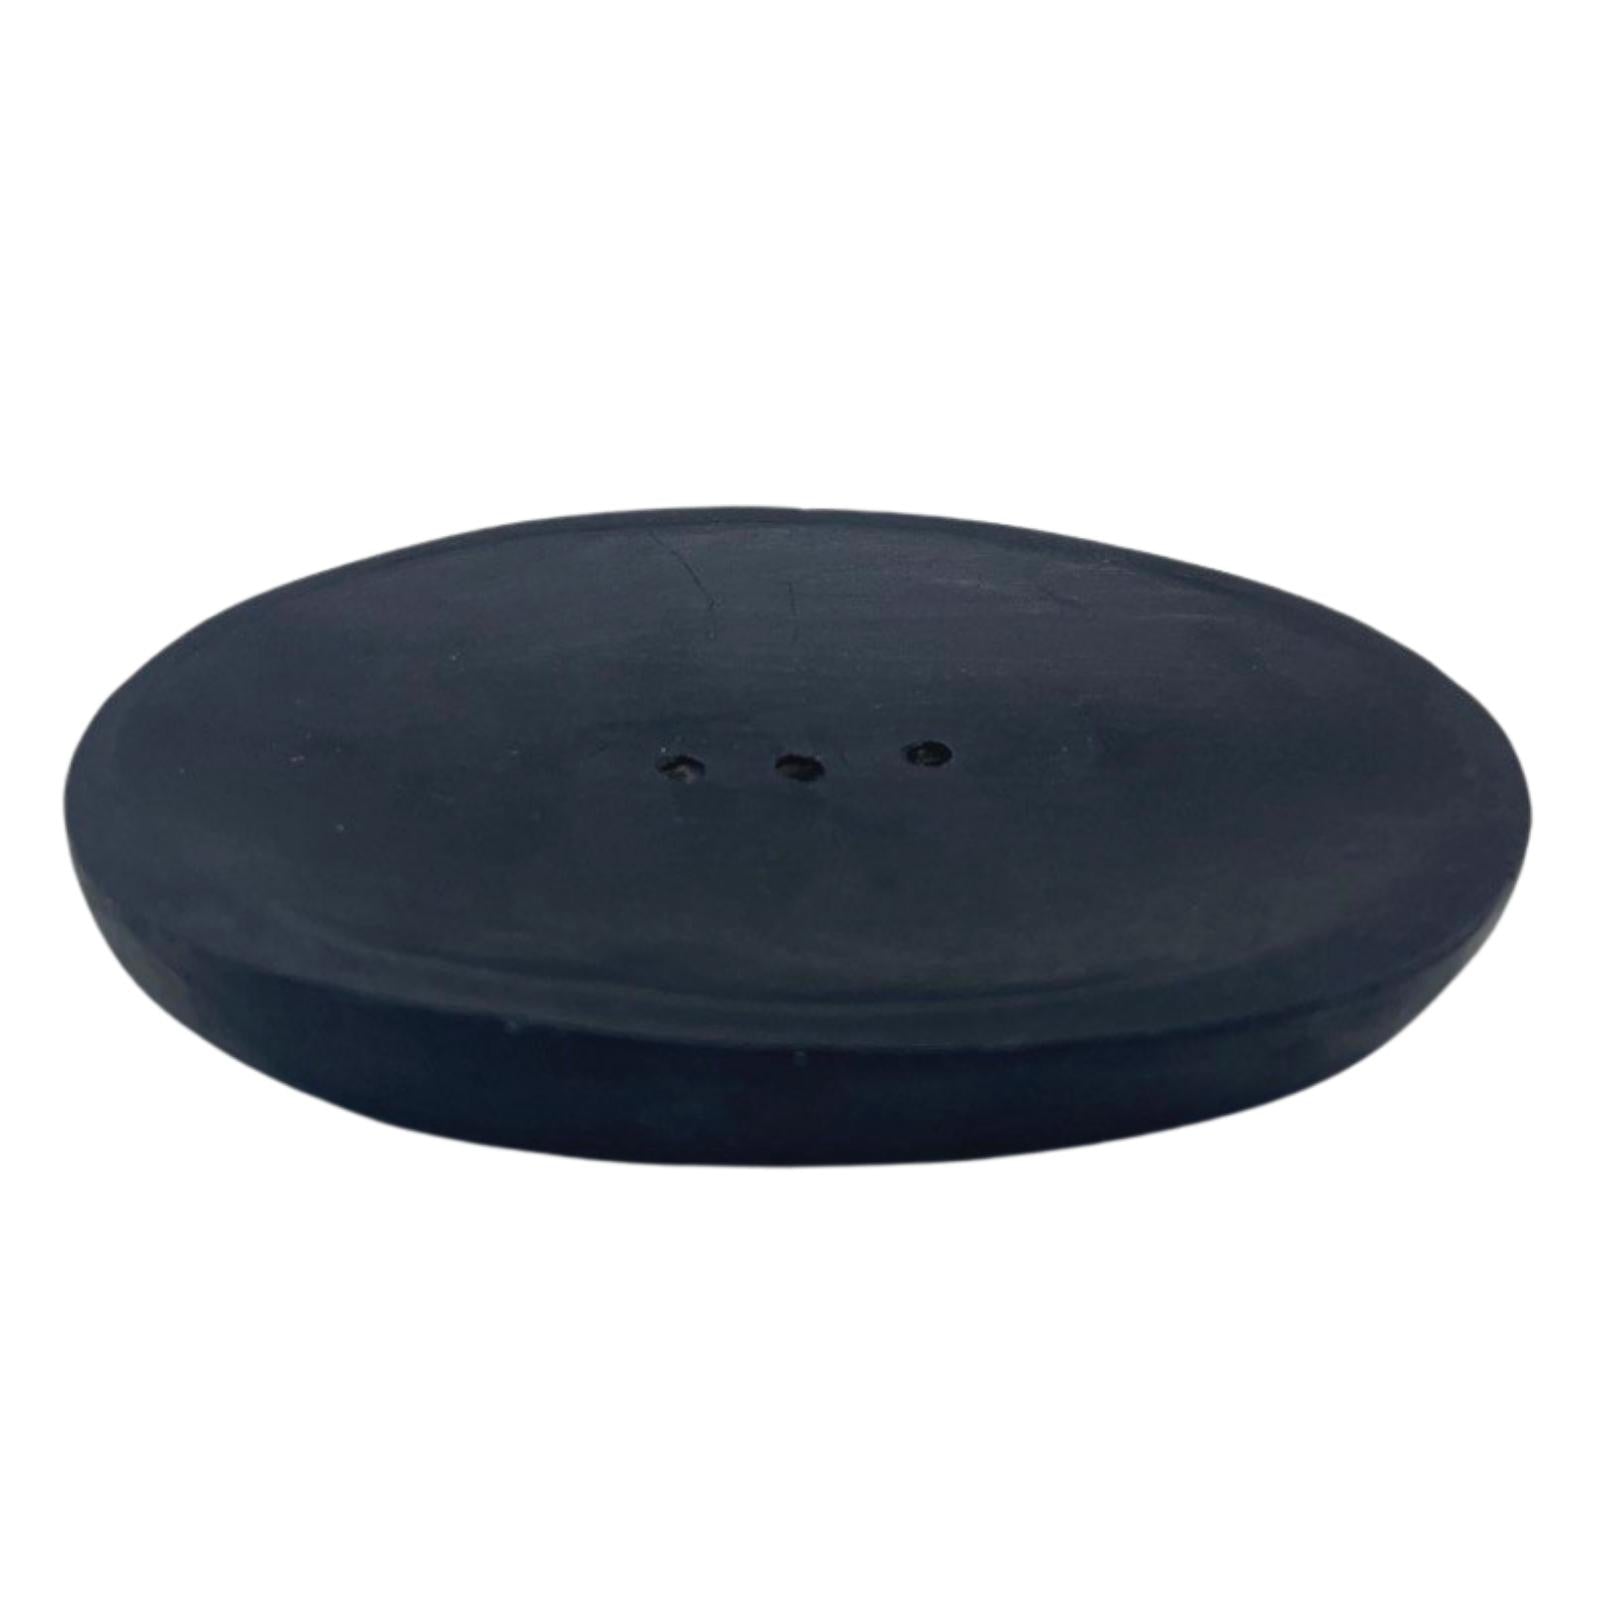 View Oval Black Marble Soap Dish information